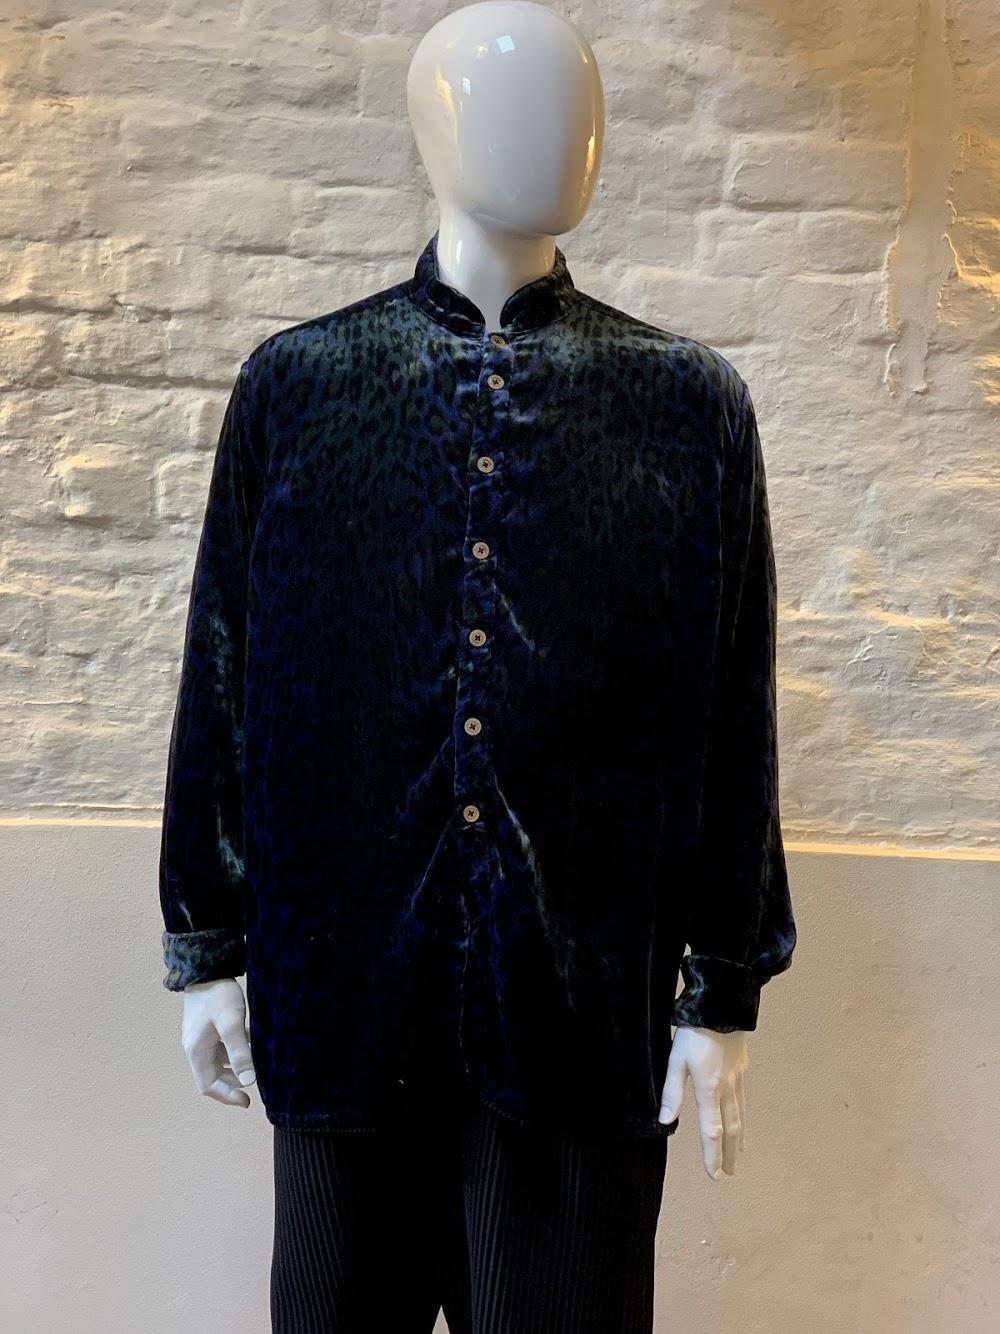 Voyage 90s Velvet Leopard Shirt made in the UK. 

The notorious Fulham Road boutique Voyage was founded in 1991 by the then husband and wife team of Tiziano and Louise Mazzilli, the Voyage label kick-started the craze for boho chic.

Every piece in